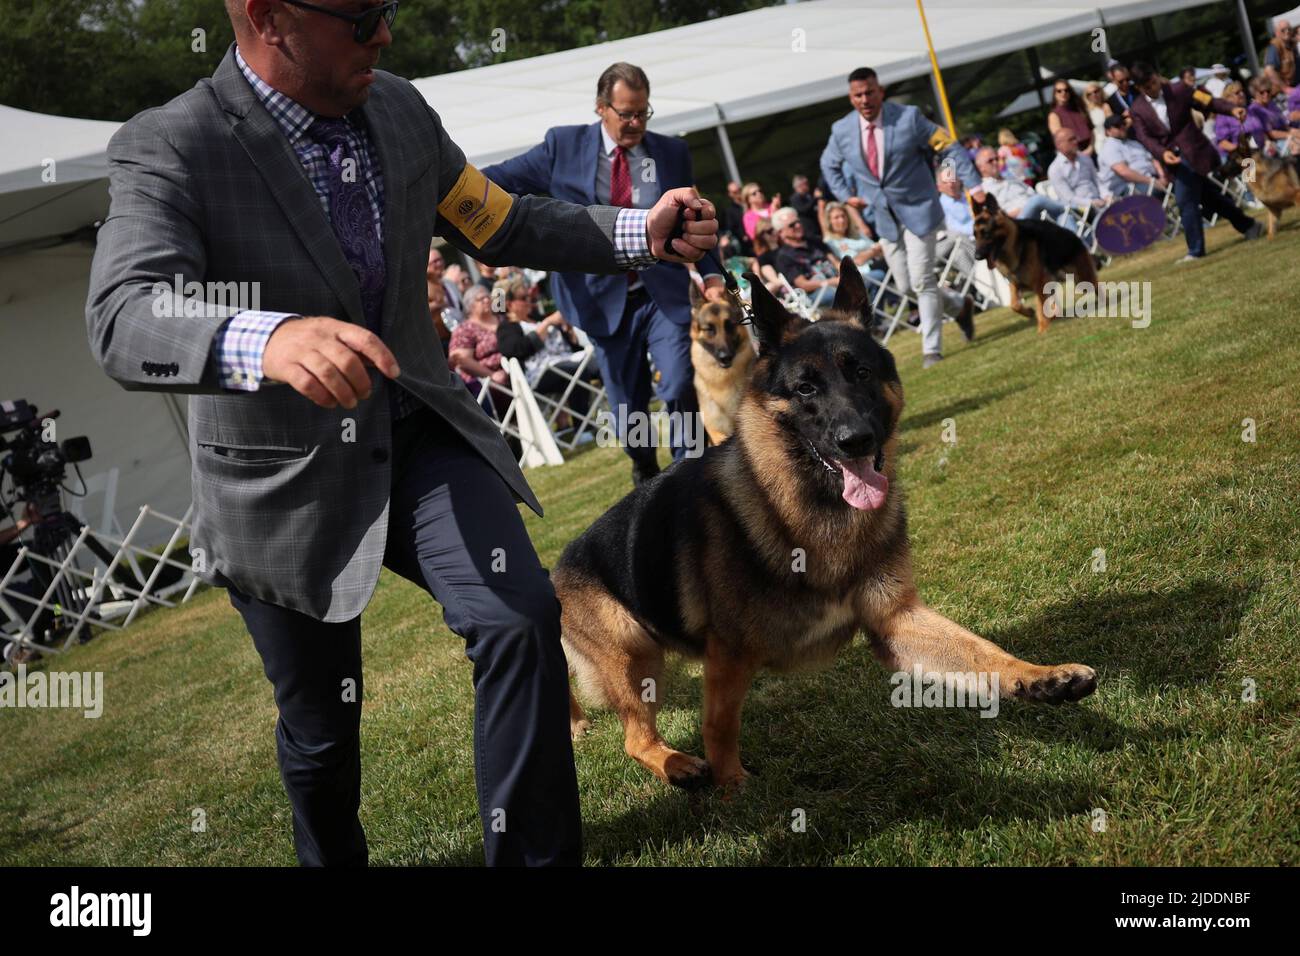 Handler Lenny Brown runs with River, a German Shepherd dog who won 'Best in Breed' during judging at the 146th Westminster Kennel Club Dog Show at the Lyndhurst Estate in Tarrytown, New York, U.S., June 20, 2022. REUTERS/Mike Segar Stock Photo